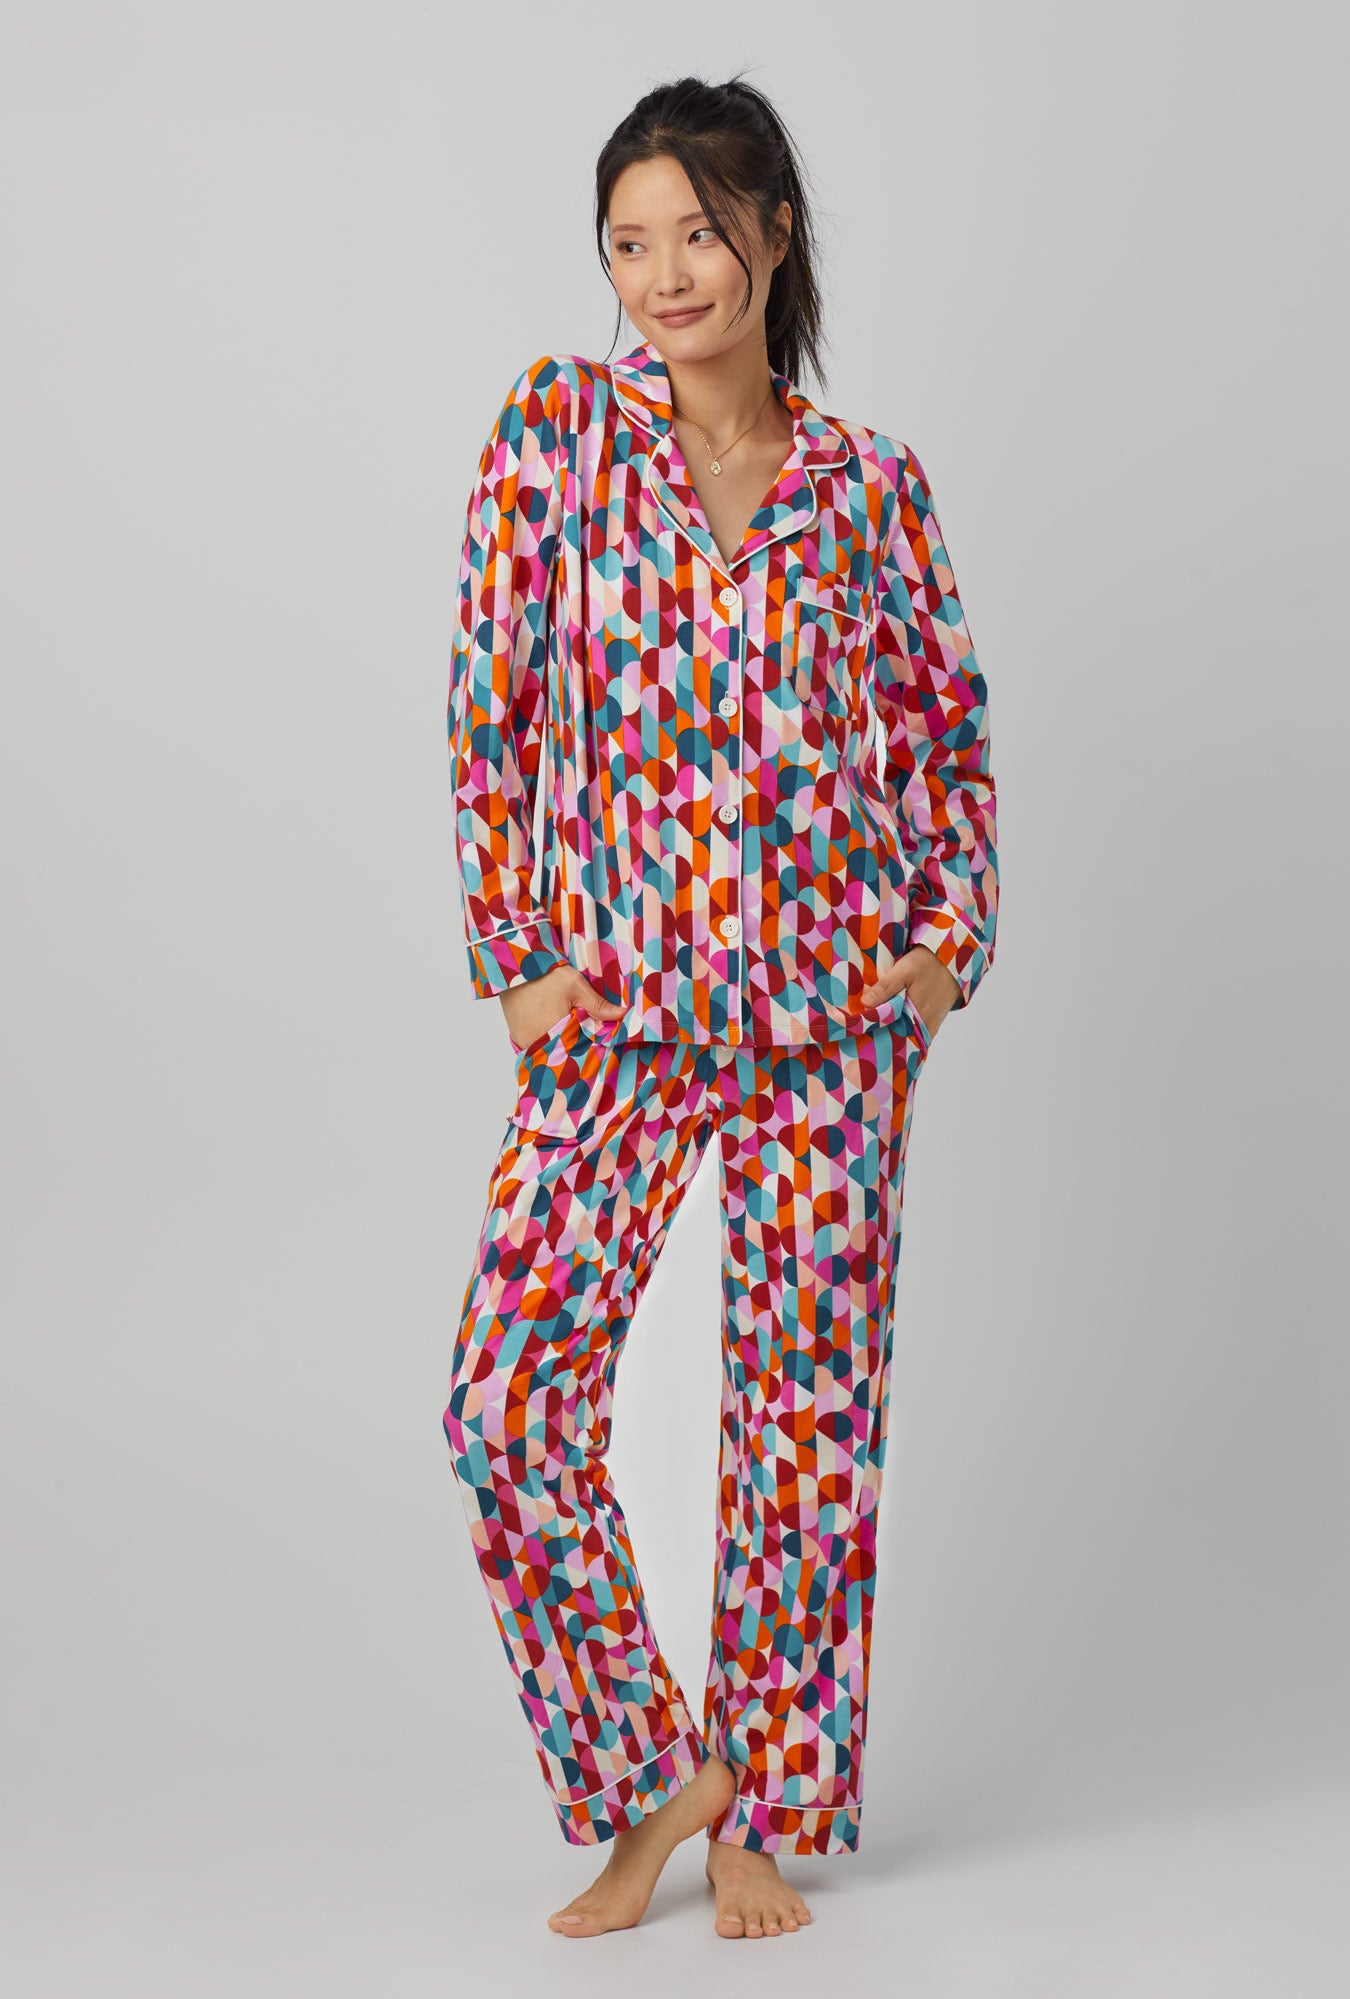 A lady wearing Long Sleeve Classic Stretch Jersey PJ Set with dancing dots print